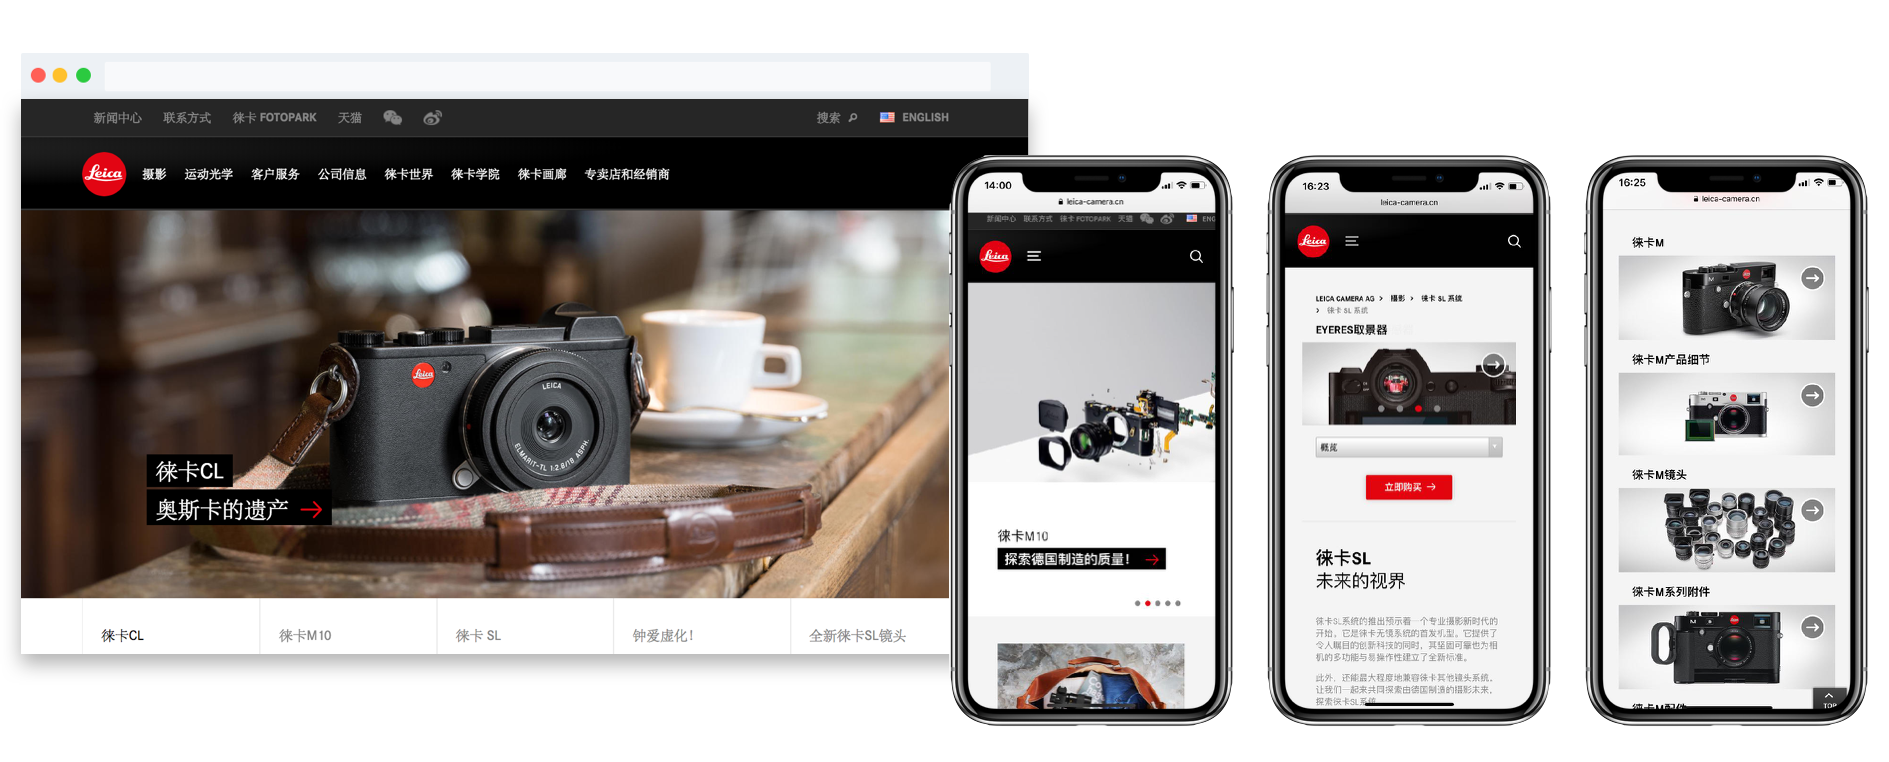 Localizing Leica in China involved switching relevant content into Chinese and the integration of a Tmall store.